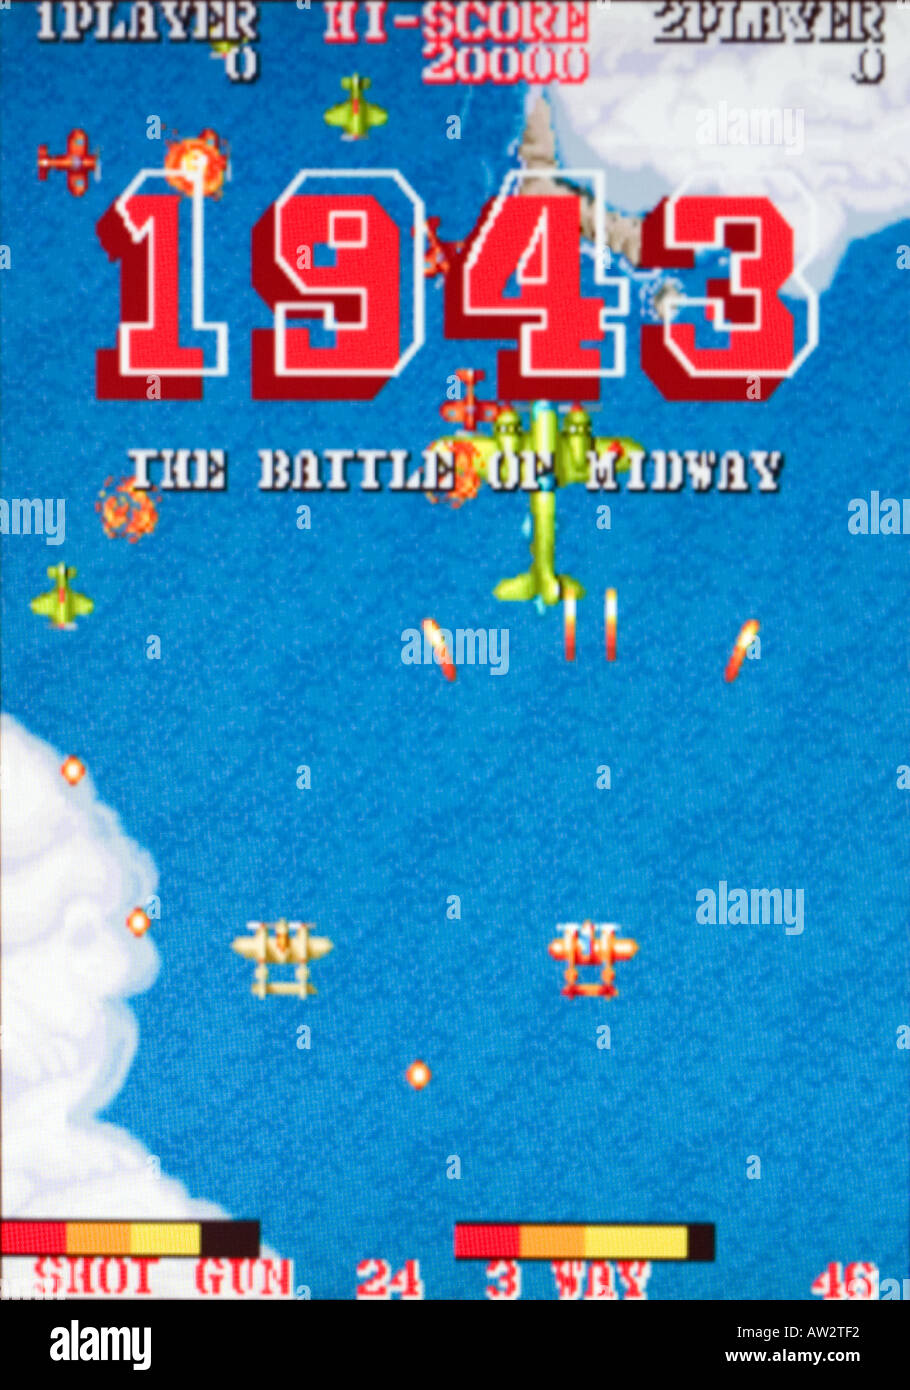 1943 The Battle of Midway Capcom Vintage arcade videogame screen shot - EDITORIAL USE ONLY Stock Photo